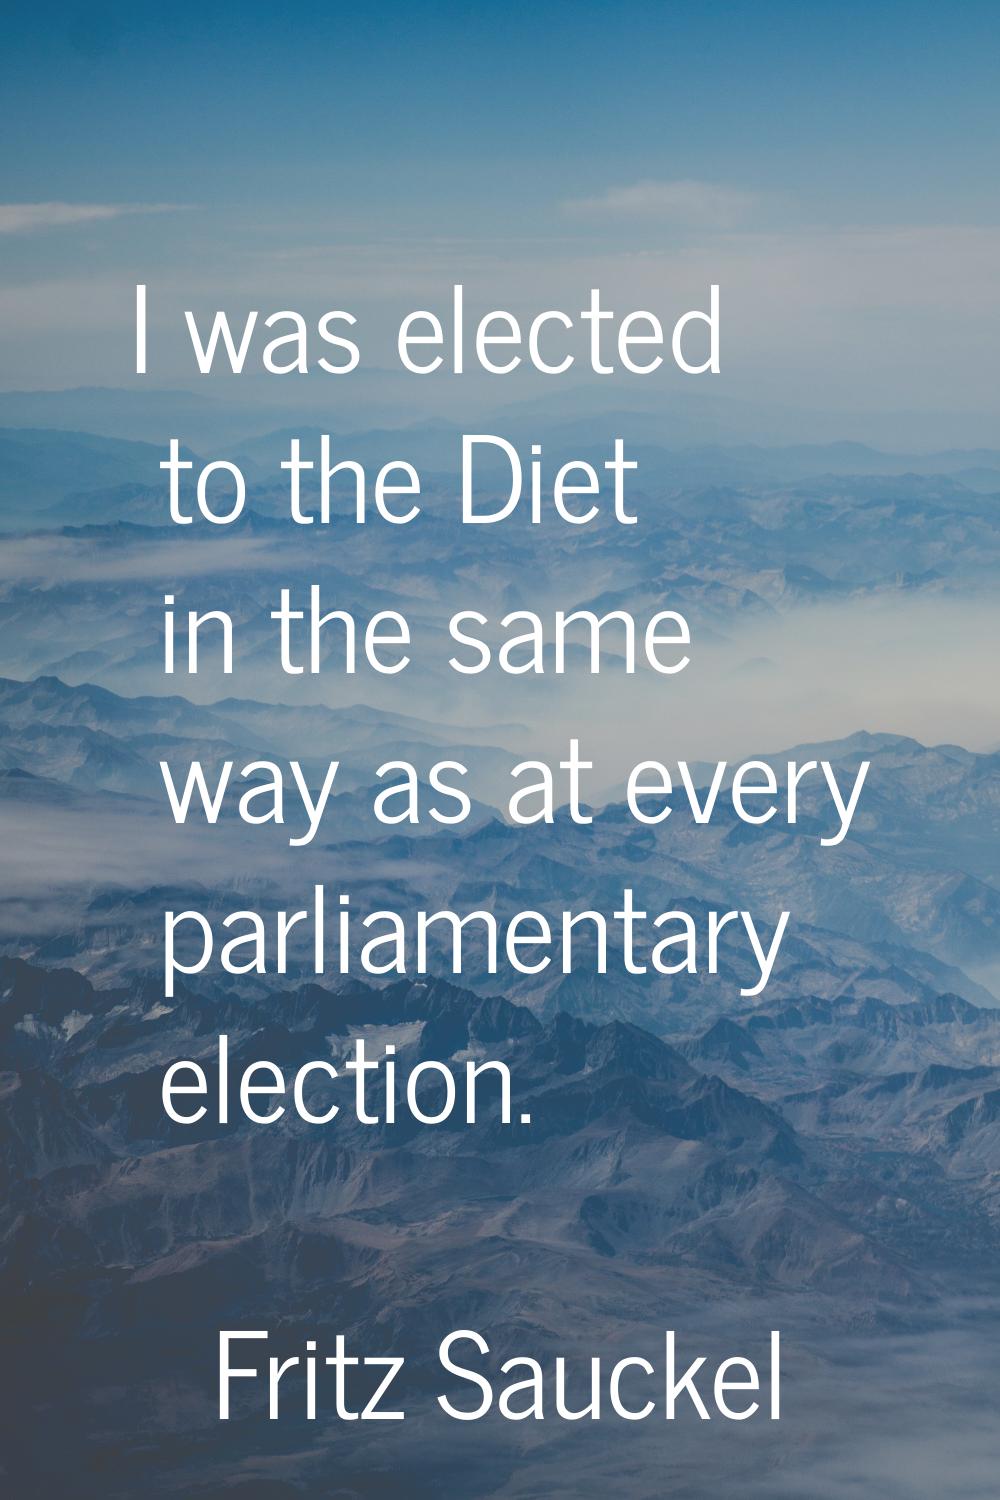 I was elected to the Diet in the same way as at every parliamentary election.